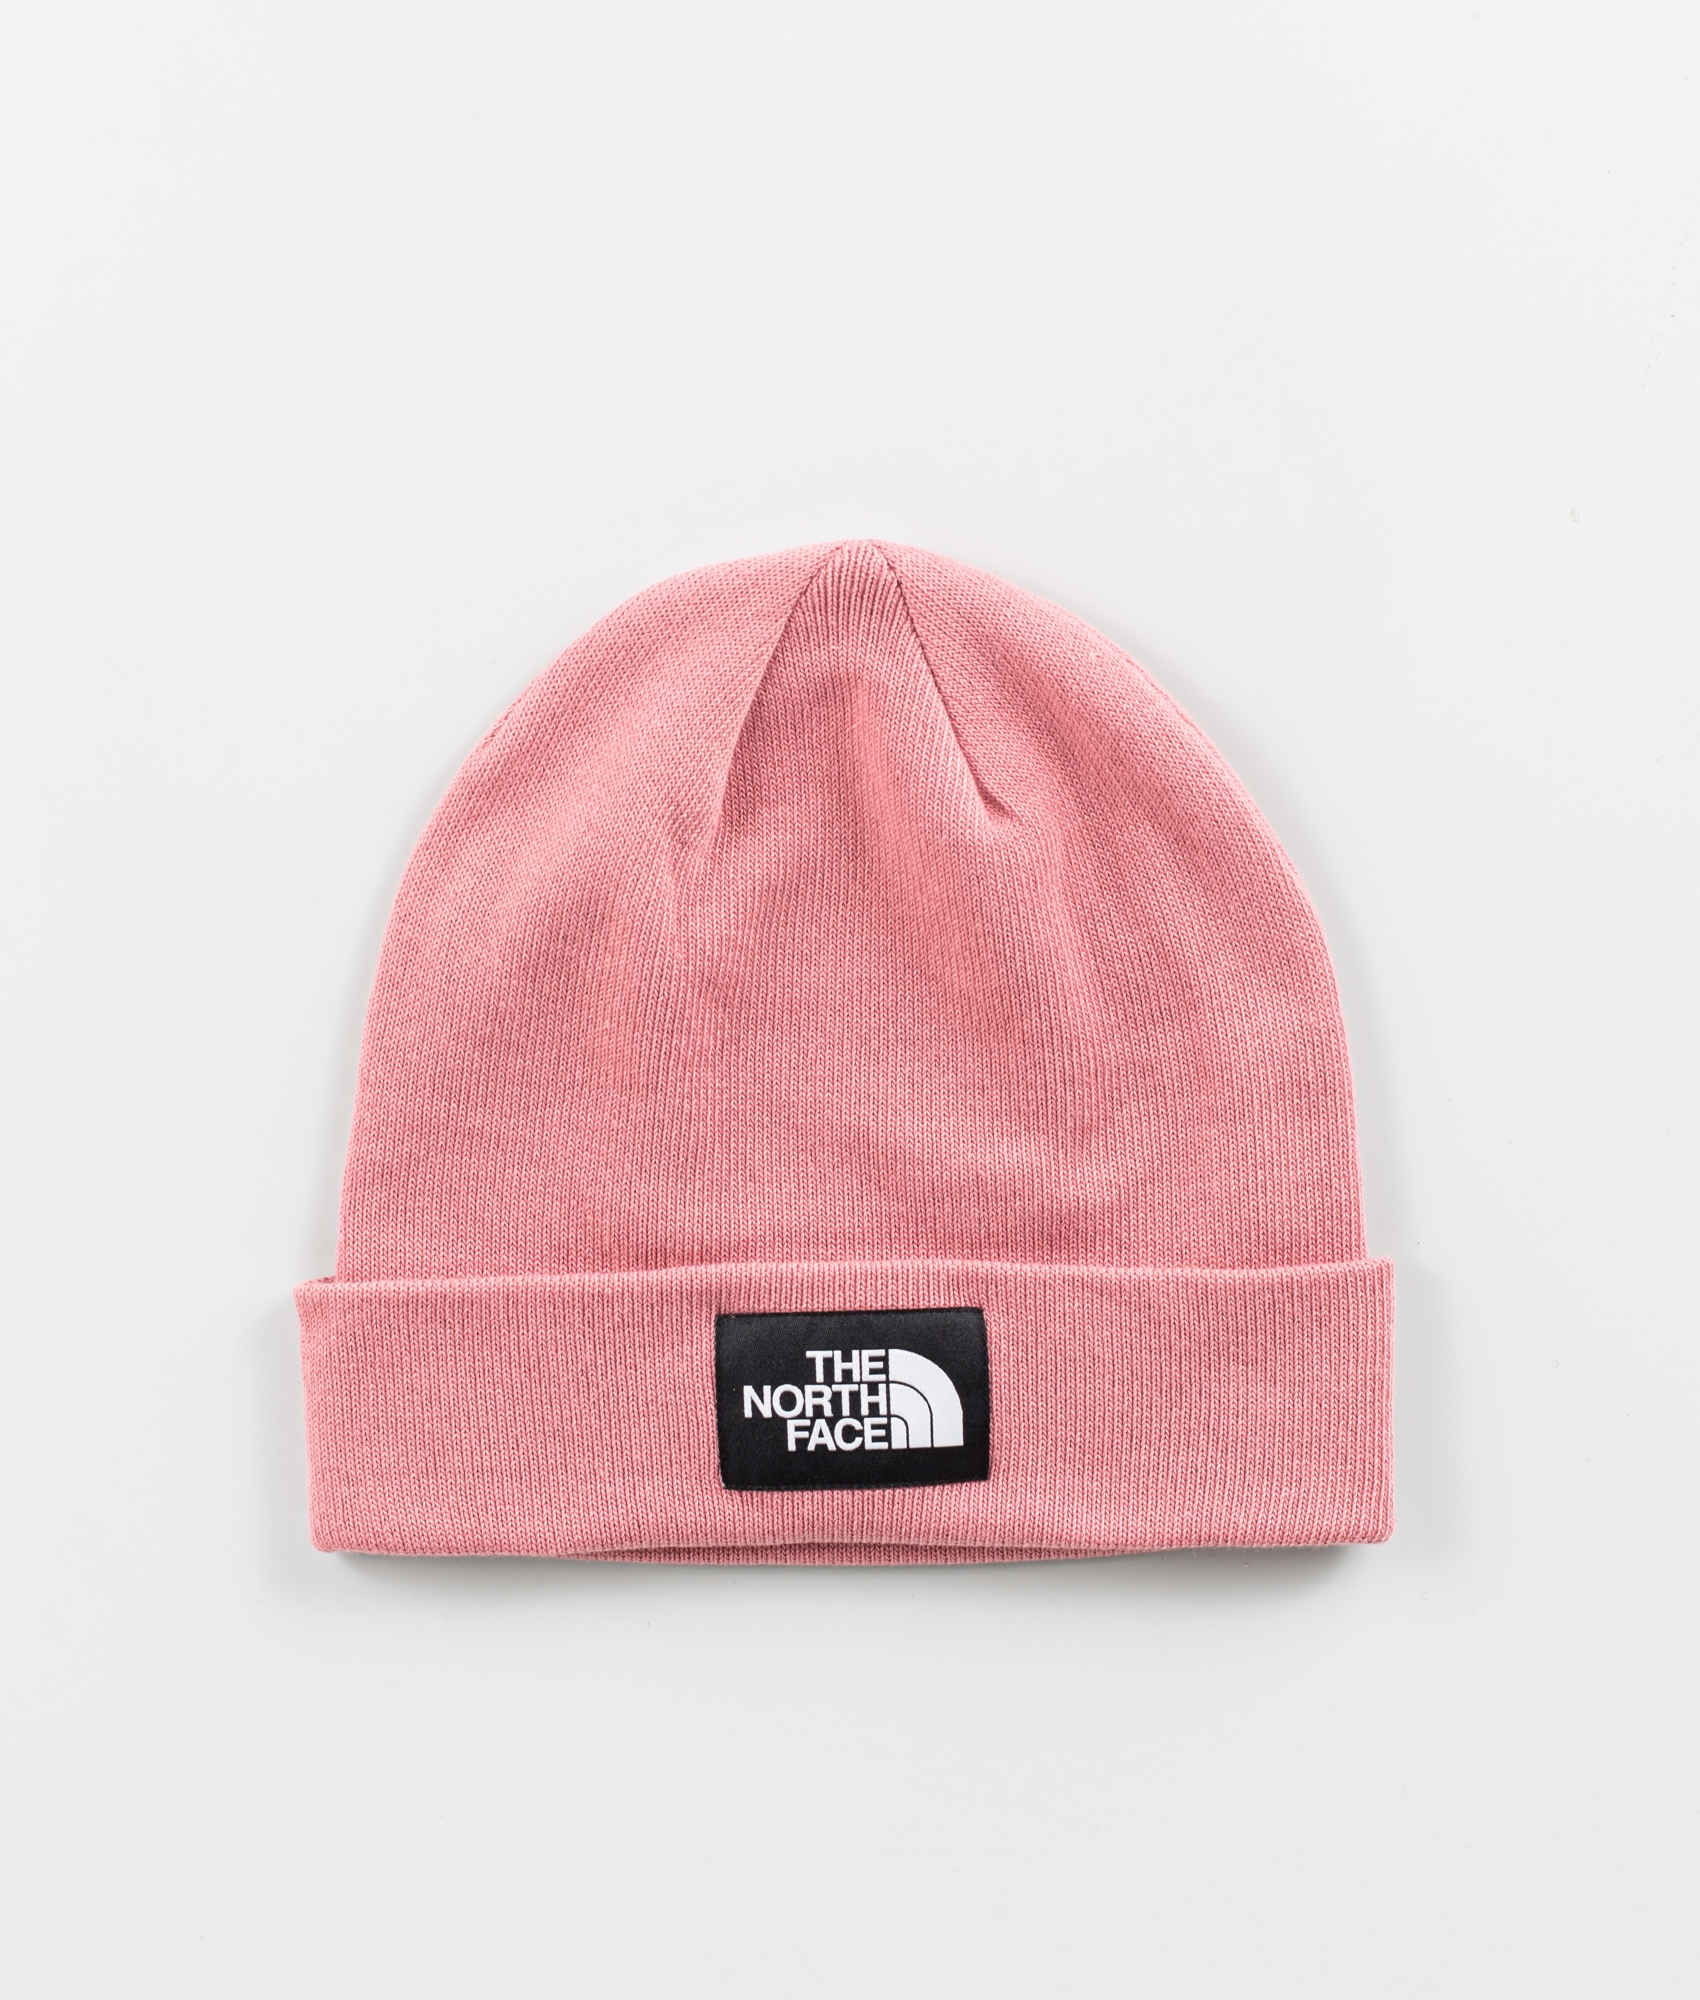 President Ongeautoriseerd bros The North Face Dock Worker Recycled Beanie Dames Mesa Rose - Roze |  Ridestore.com